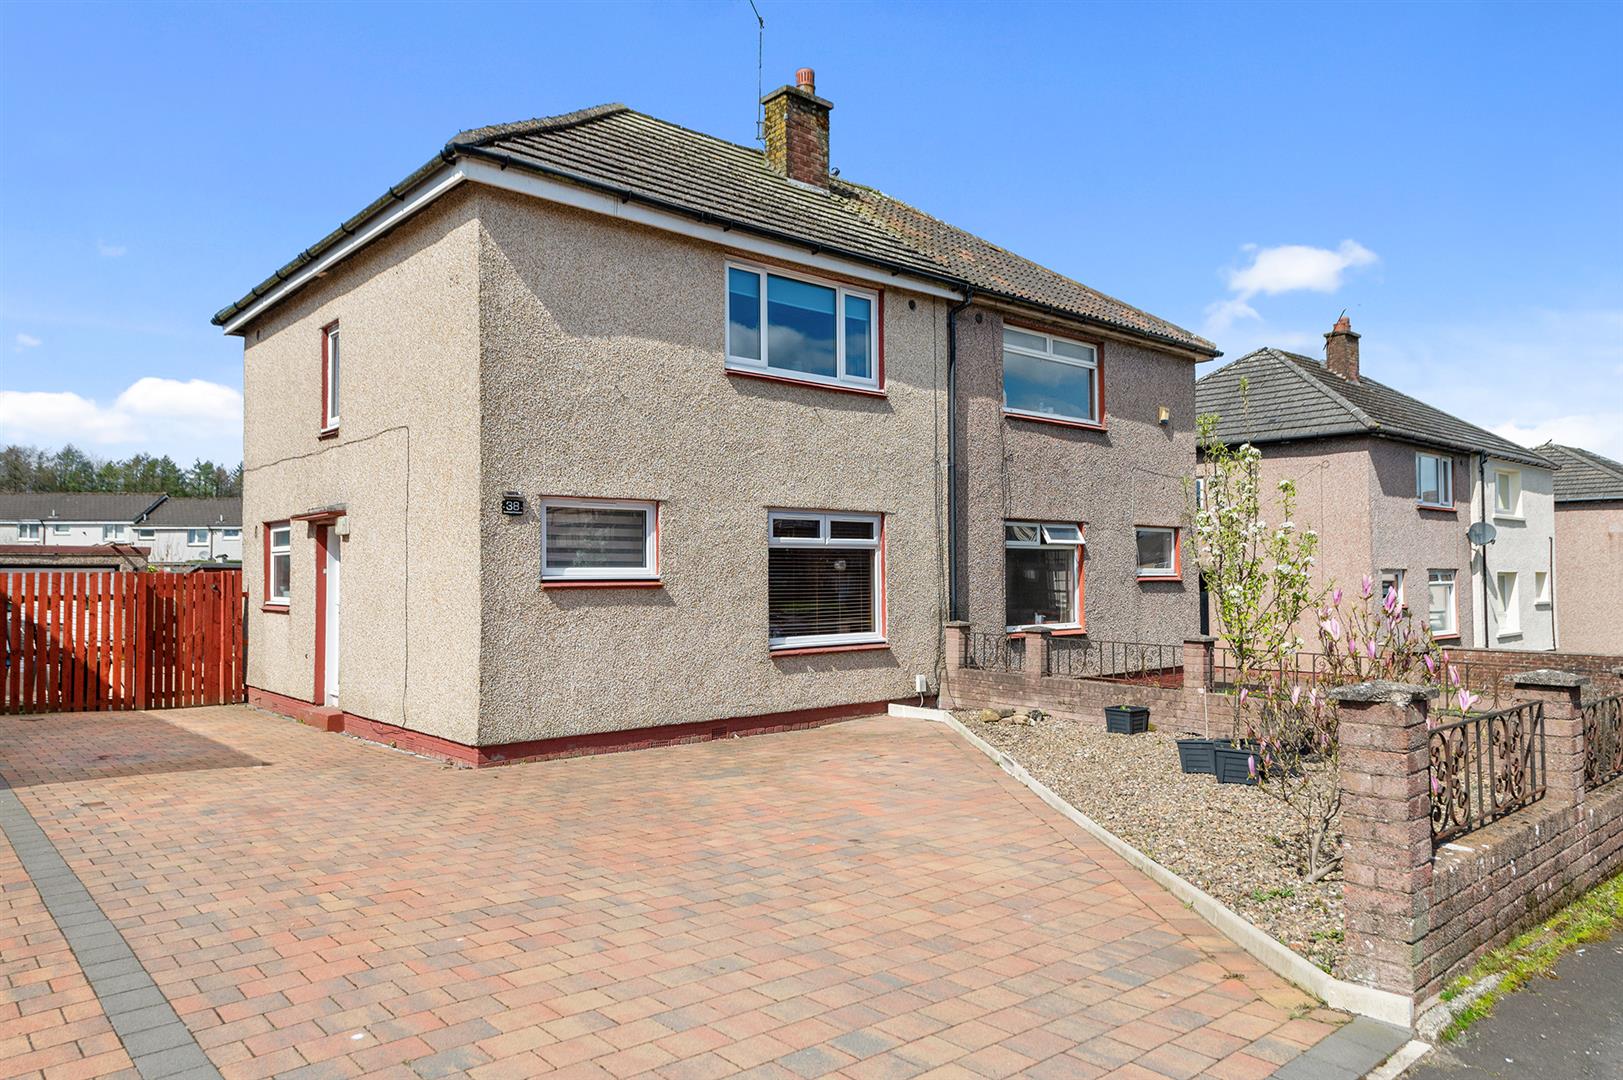 3 bed house for sale in Bankhead Crescent, Falkirk, FK4 